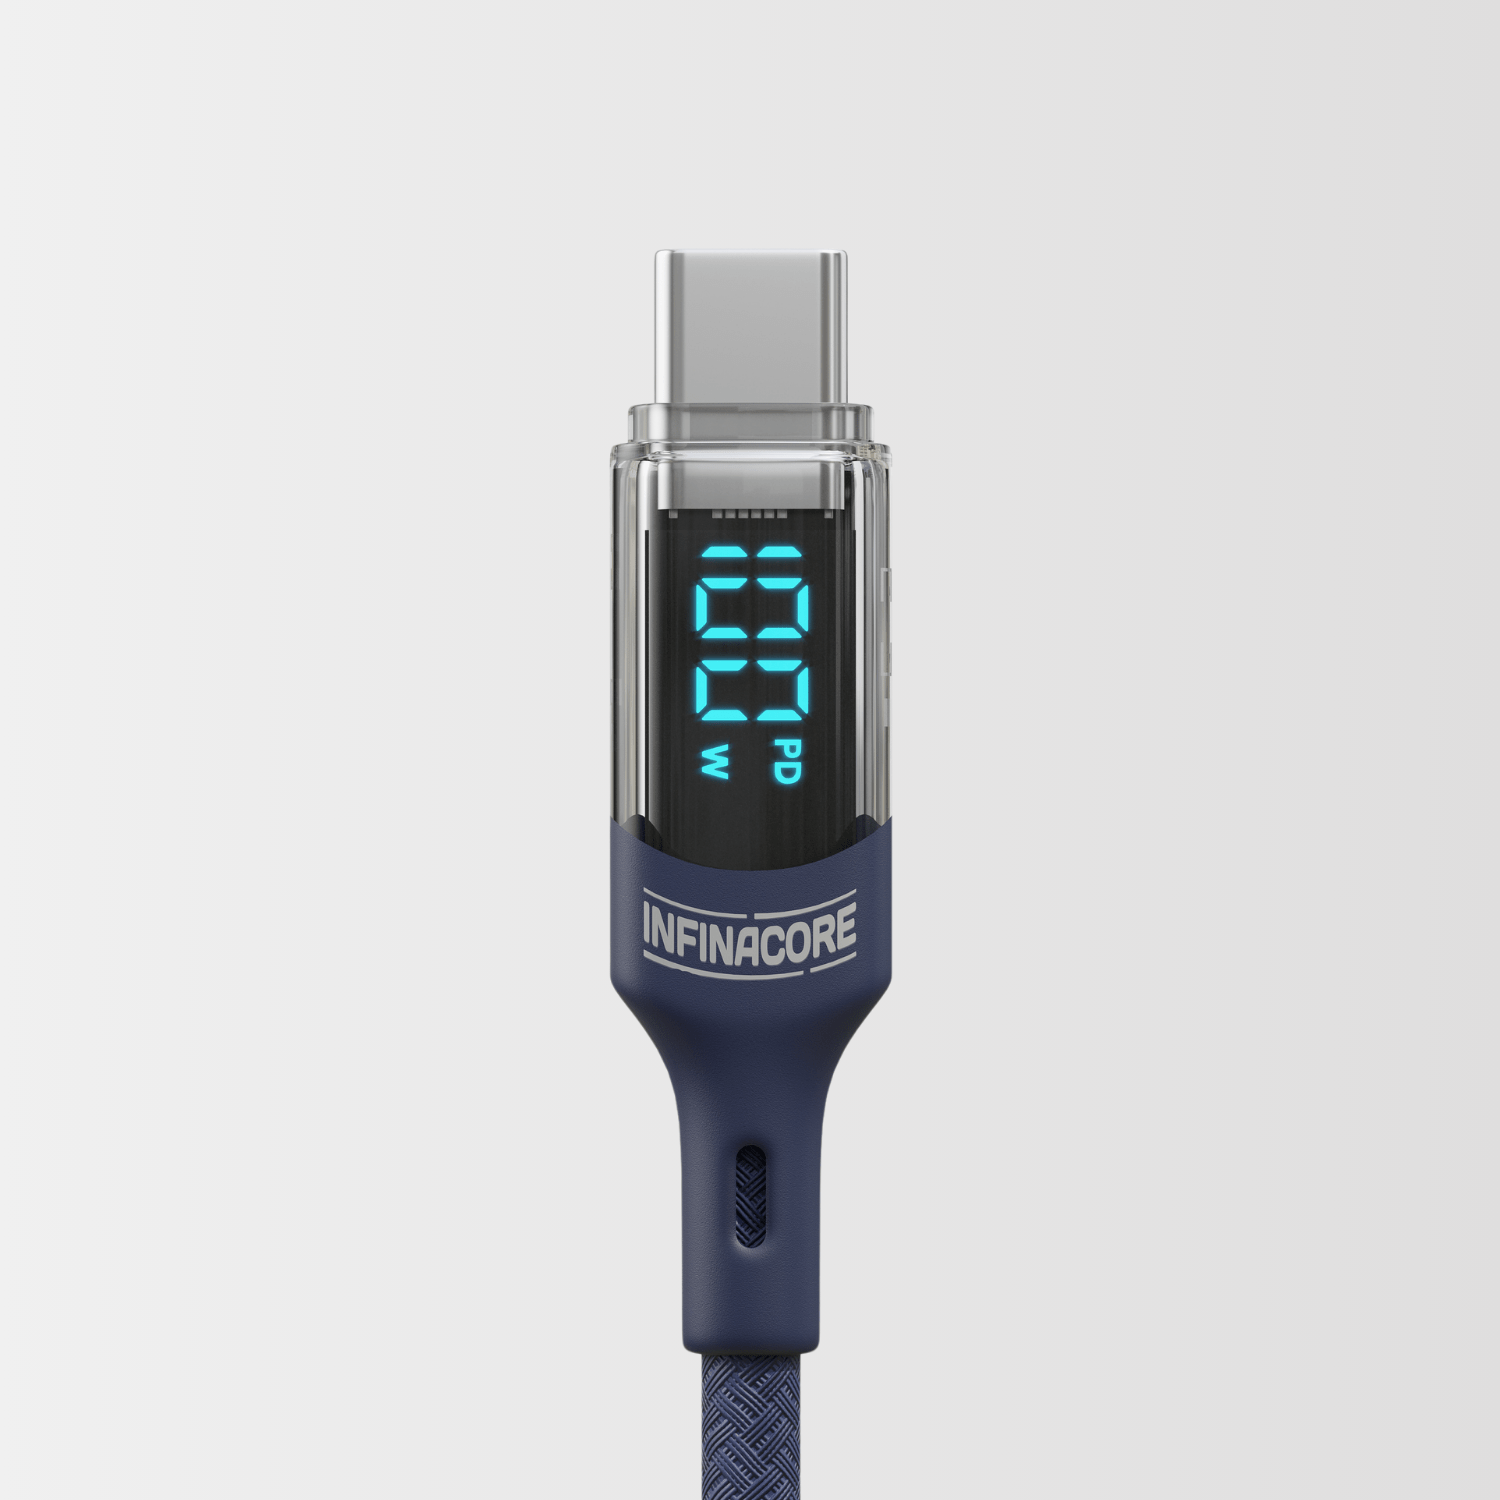 Woven LED Wattage 100W Display Cable - InfinaCore®